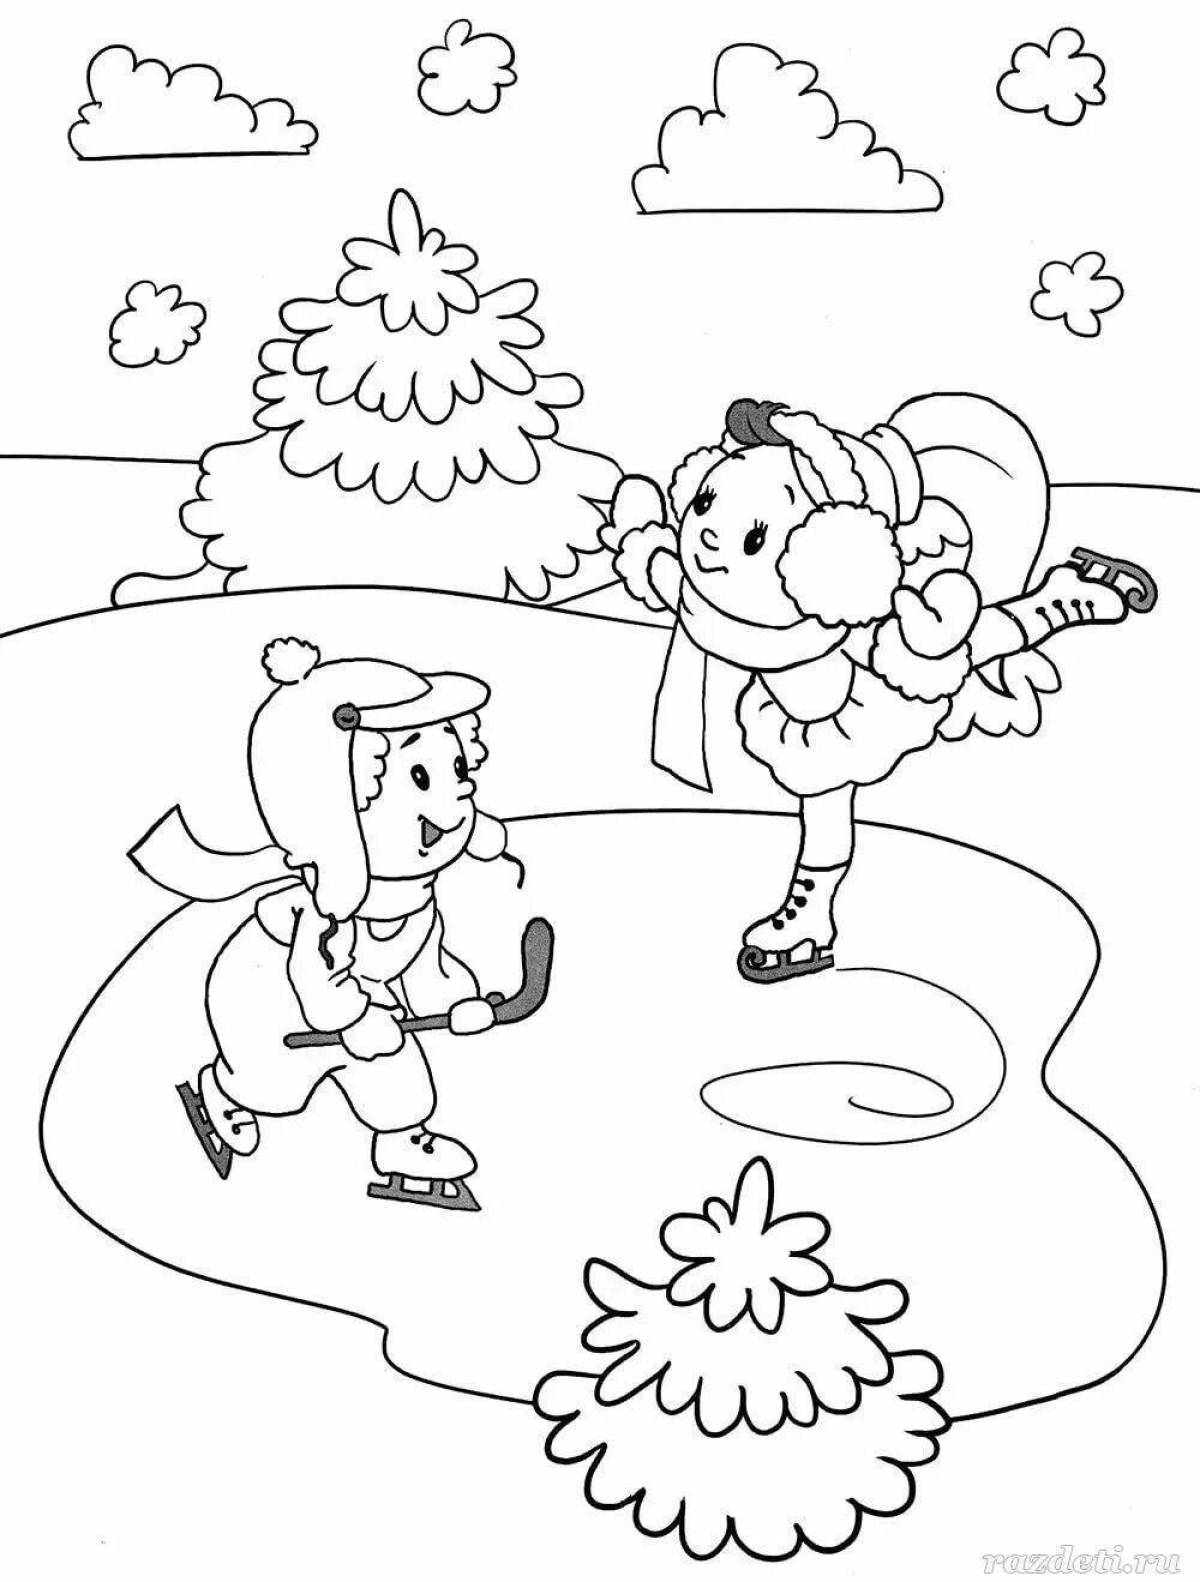 Exciting winter coloring book